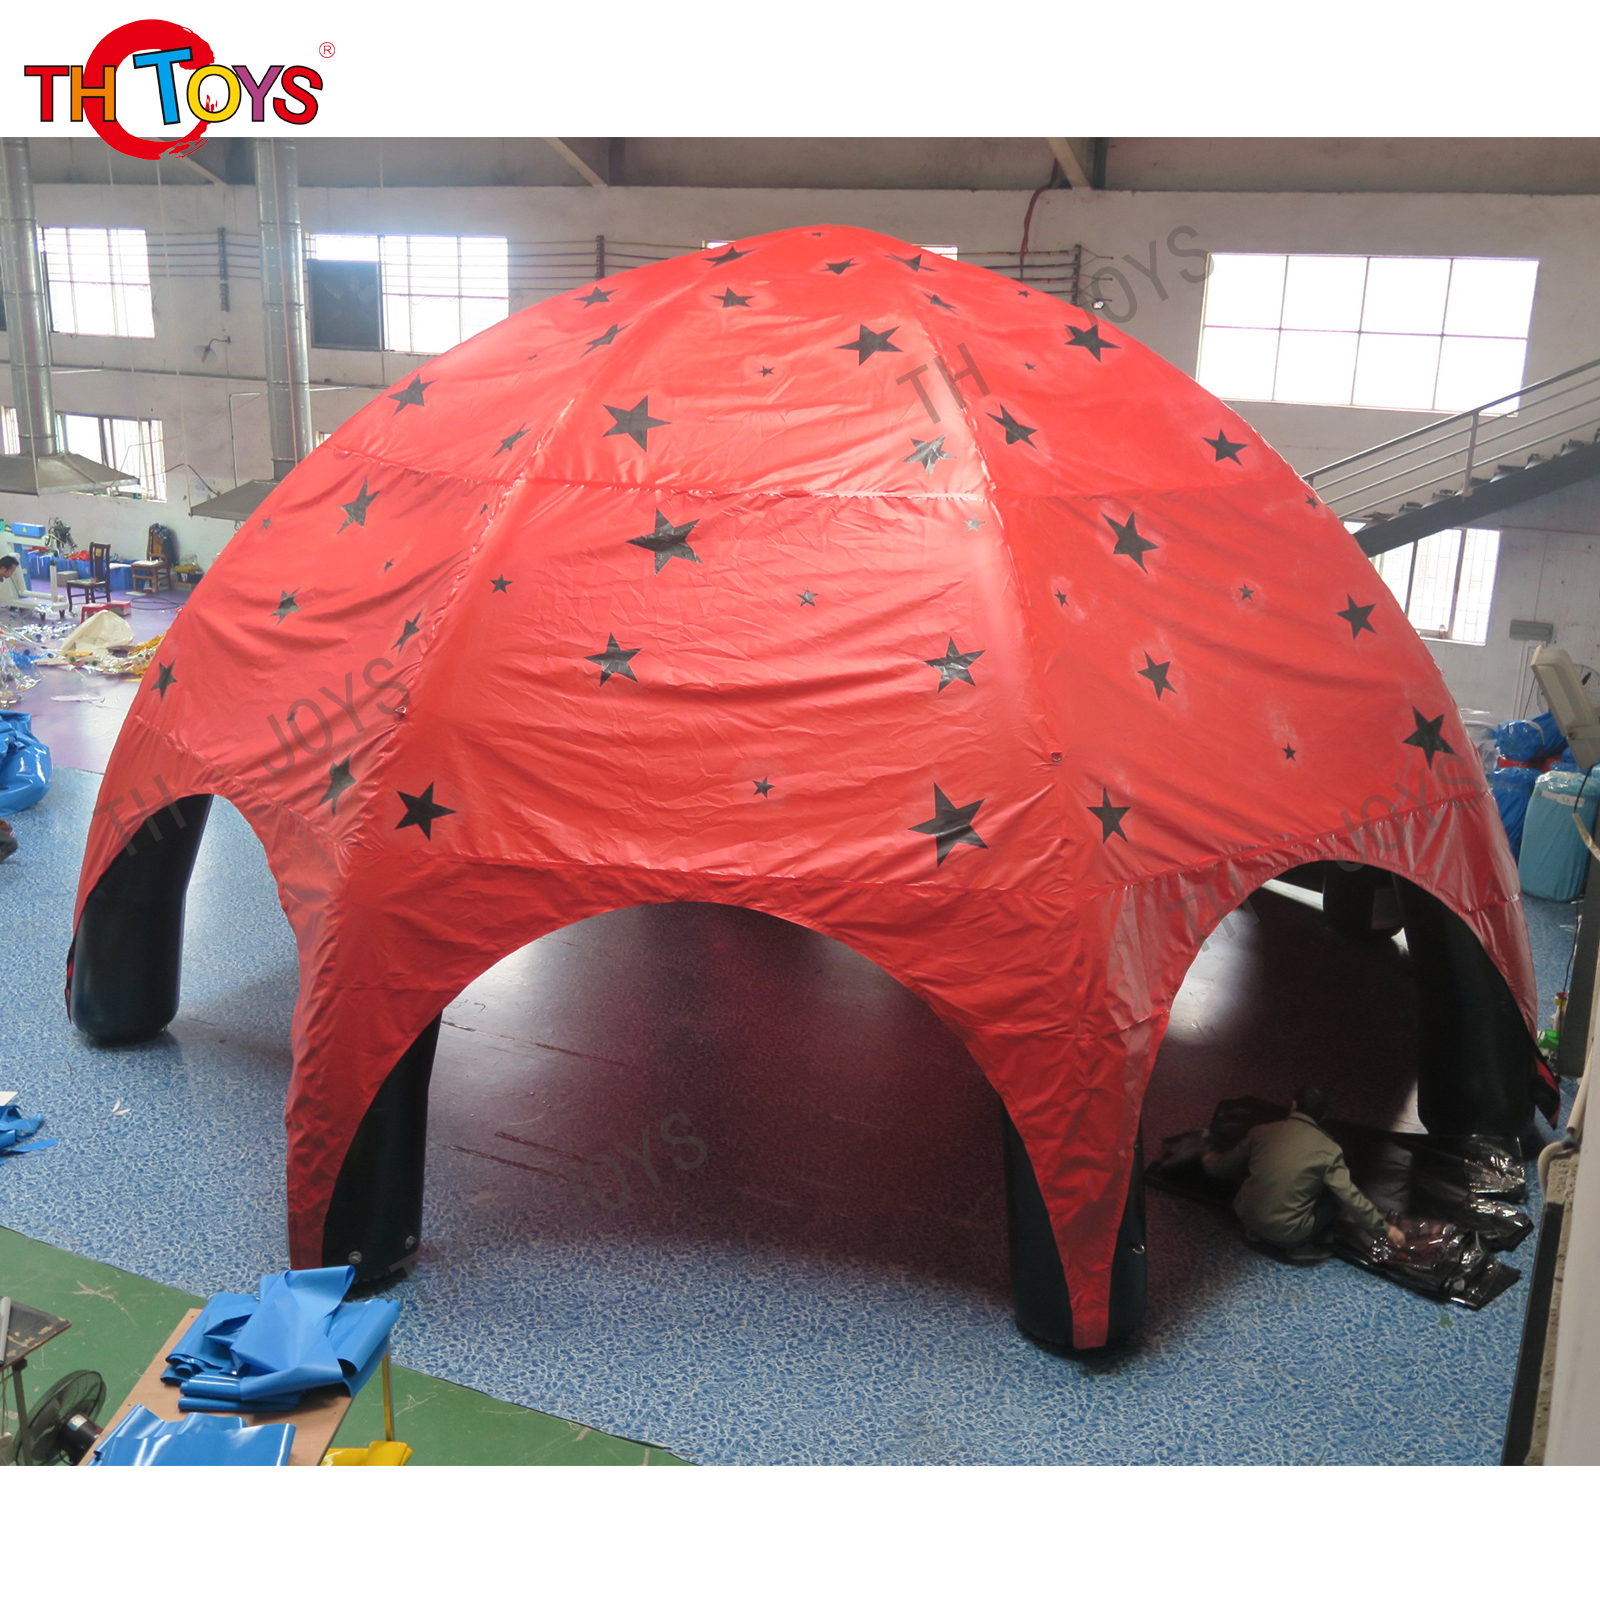 Inflatable spider tents04